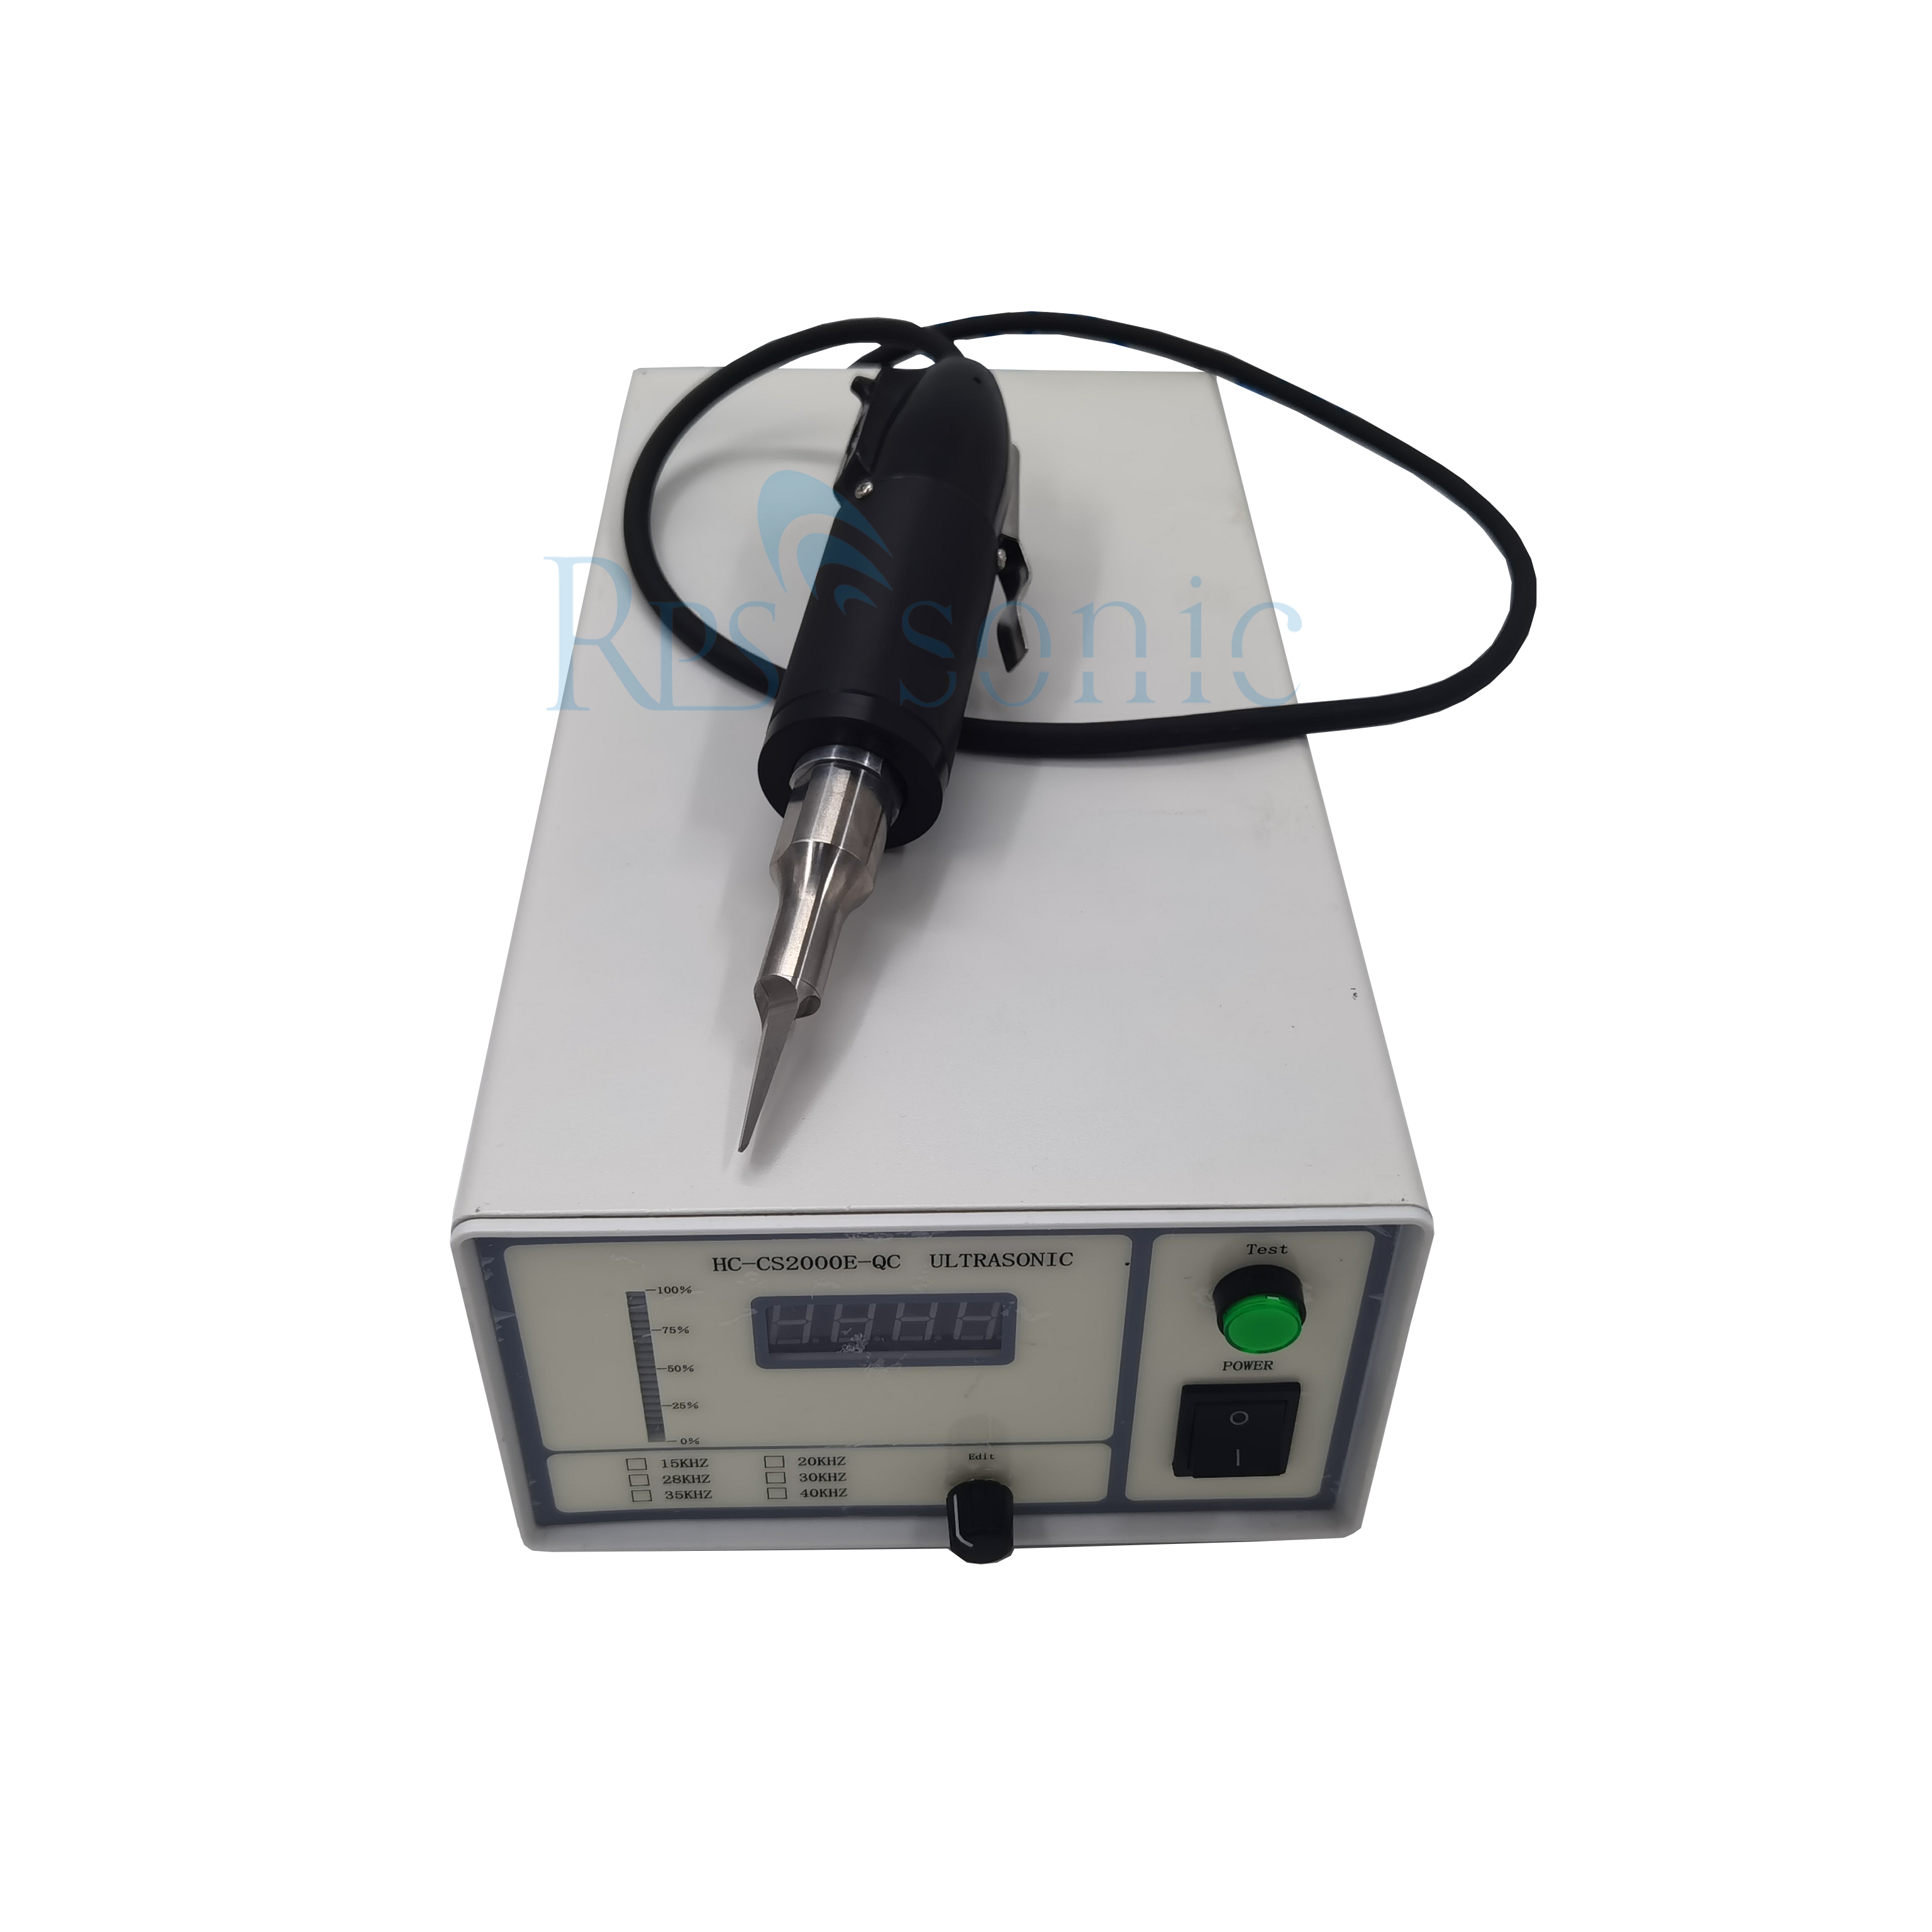 Buy hot Plastic Ultrasonic Cutting Machine 40khz Handheld with Sharp Knife  for sale,great ultrasonic machines suppliers,manufacturers